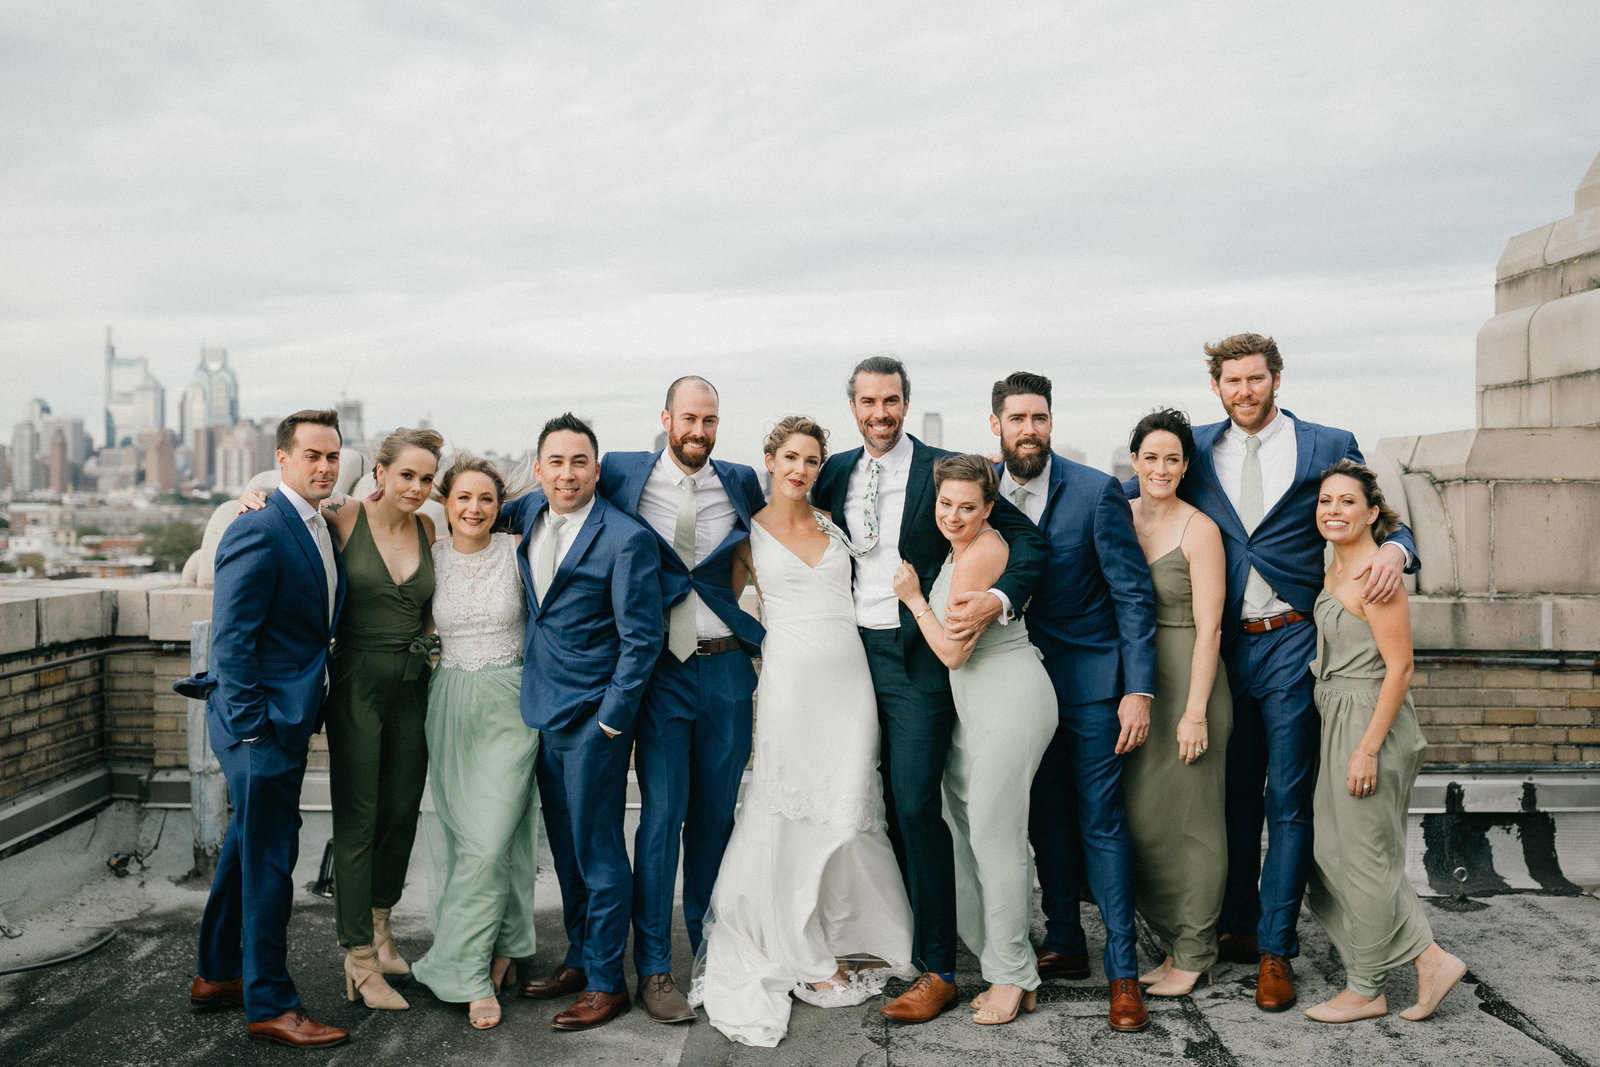 Bridal party photographed on the coolest rooftop wedding venue in South Philadelphia.